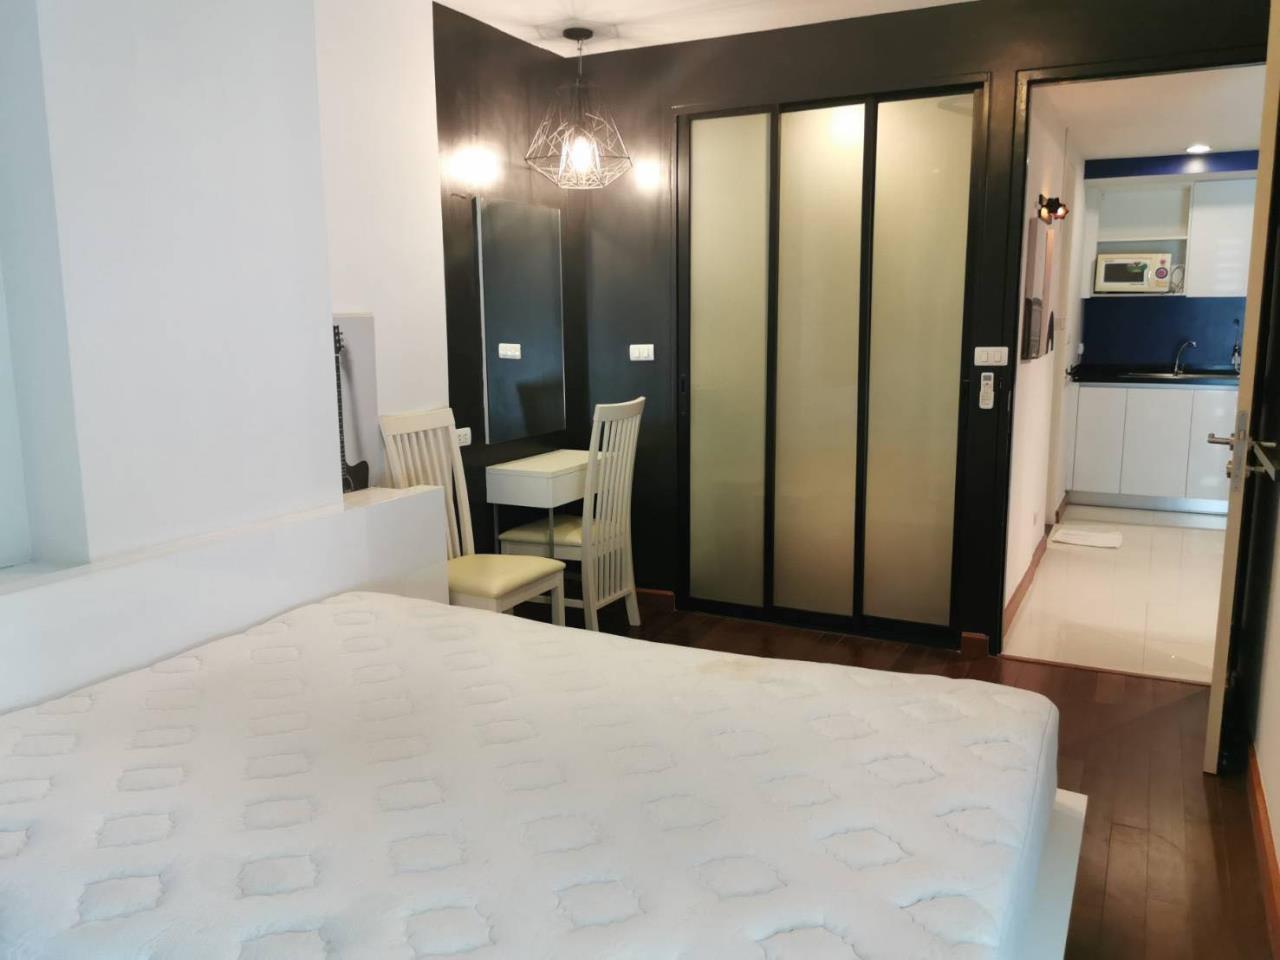 Kwankhao Kathinthong Agency's CONDO FOR SALE - Le Cote Thonglor 8, 1 Bedroom, 5.6 MB. 5